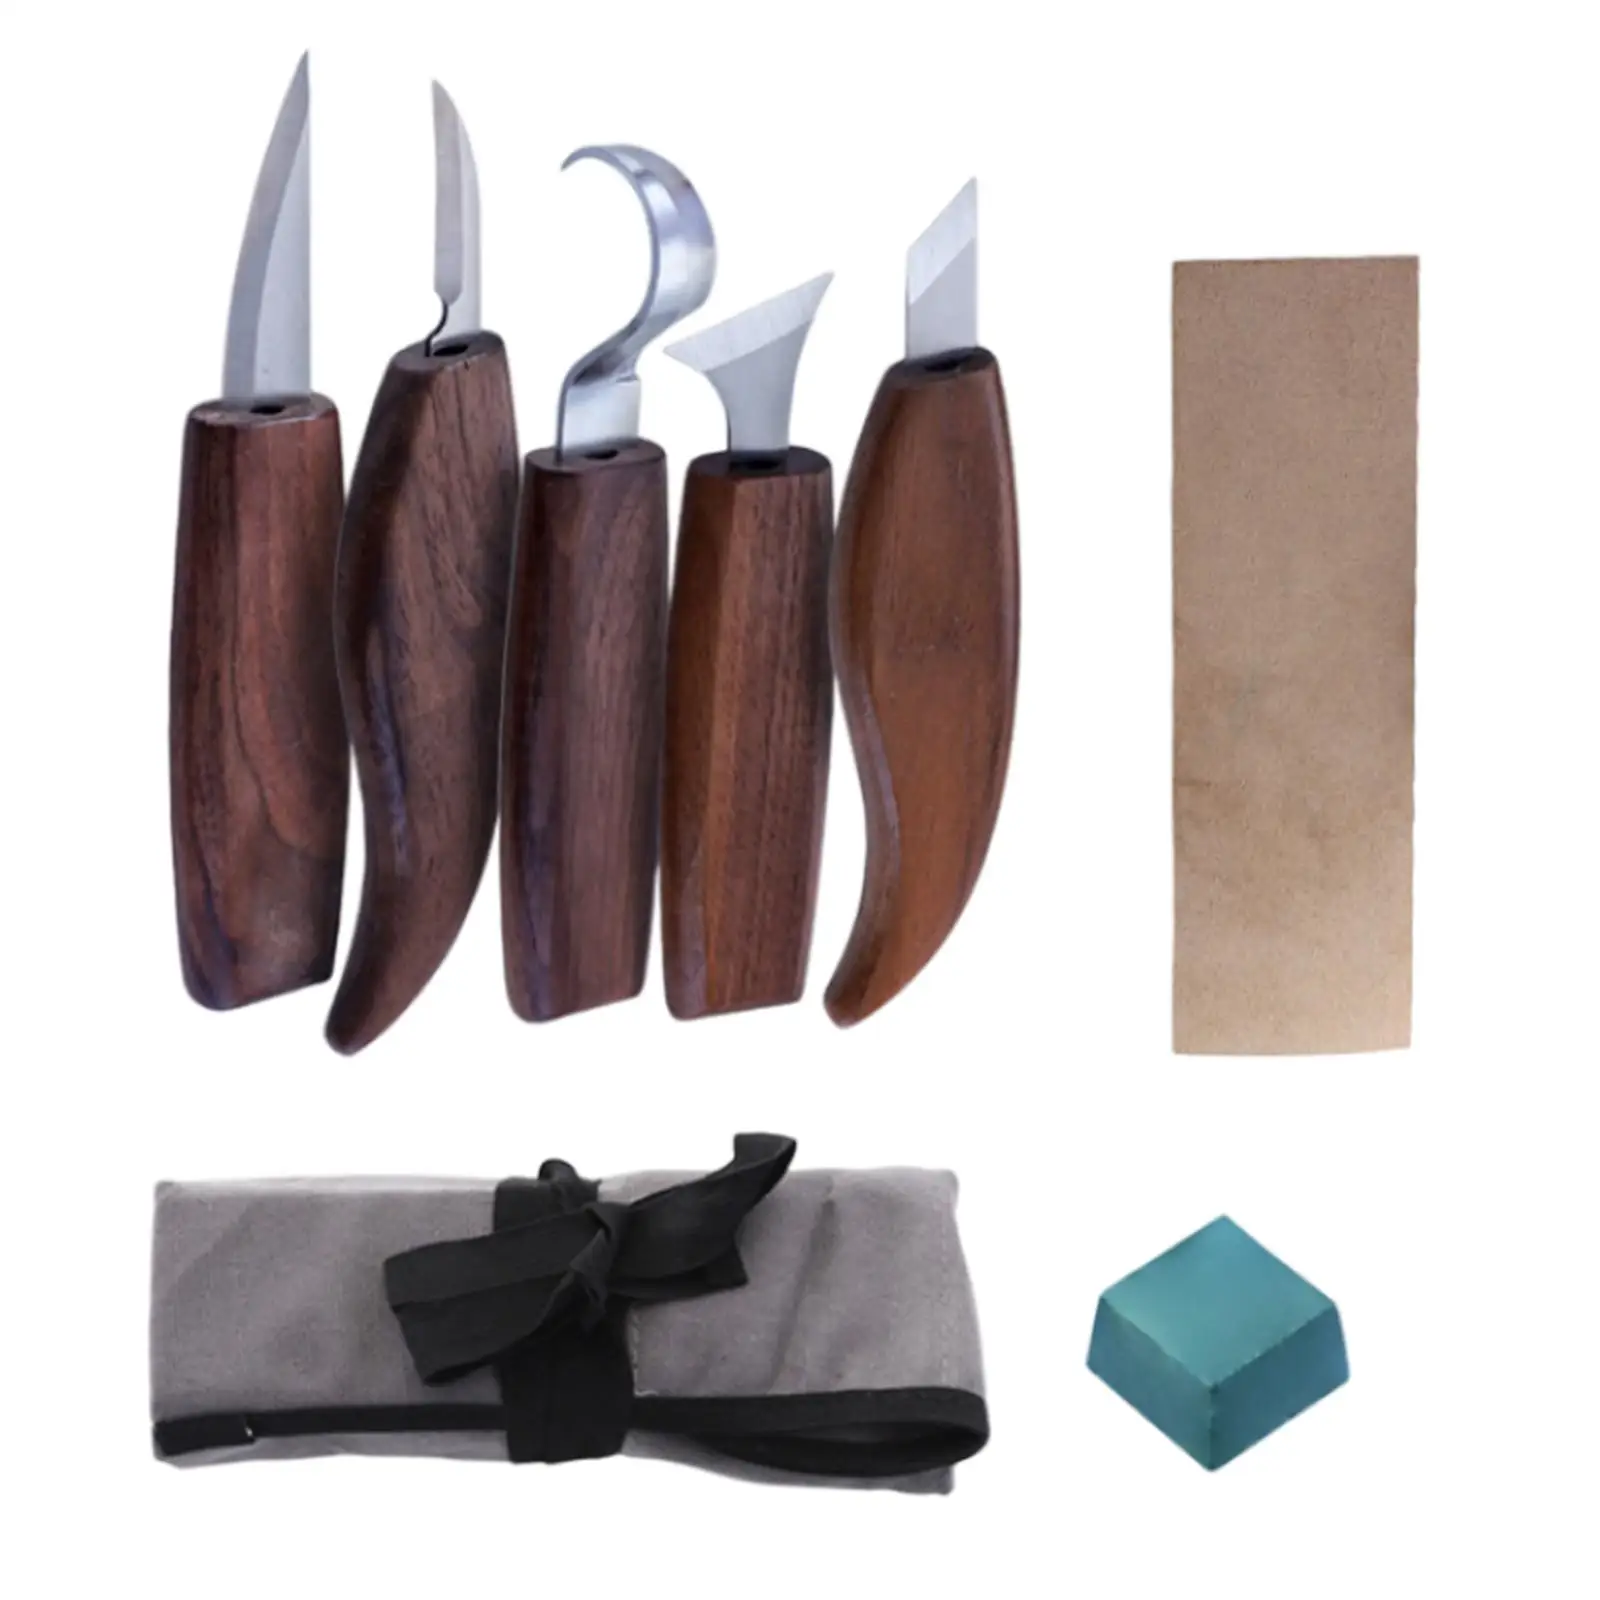 8 Pieces Wood Carving Tools Durable Wear Resistant Hand Carving Knife Set for Handmade Wood Carving Paper Carving Kids Adults